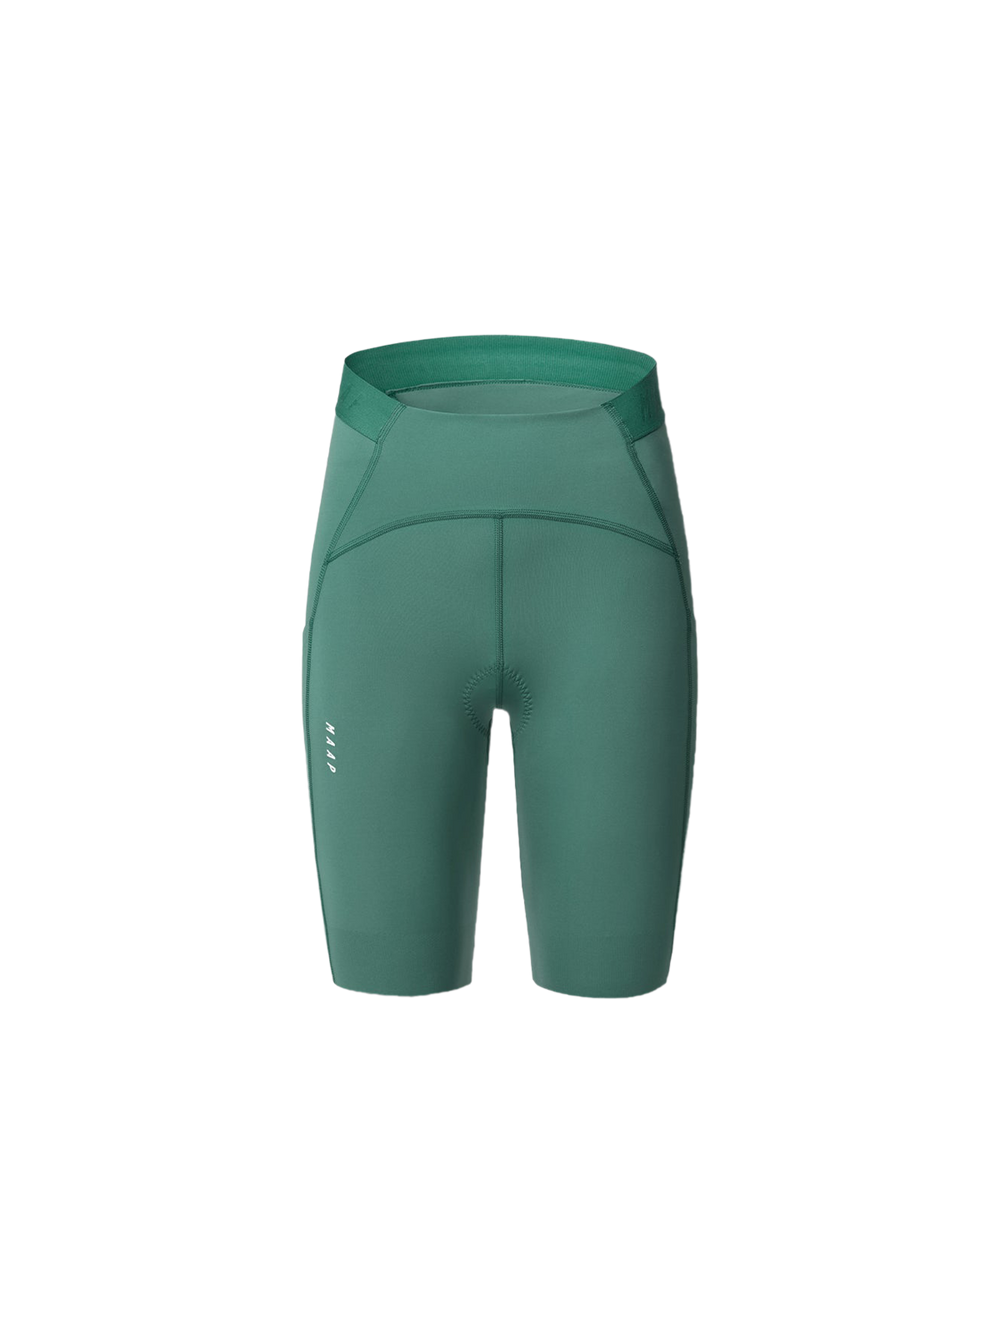 Product Image for Women's Sequence Short